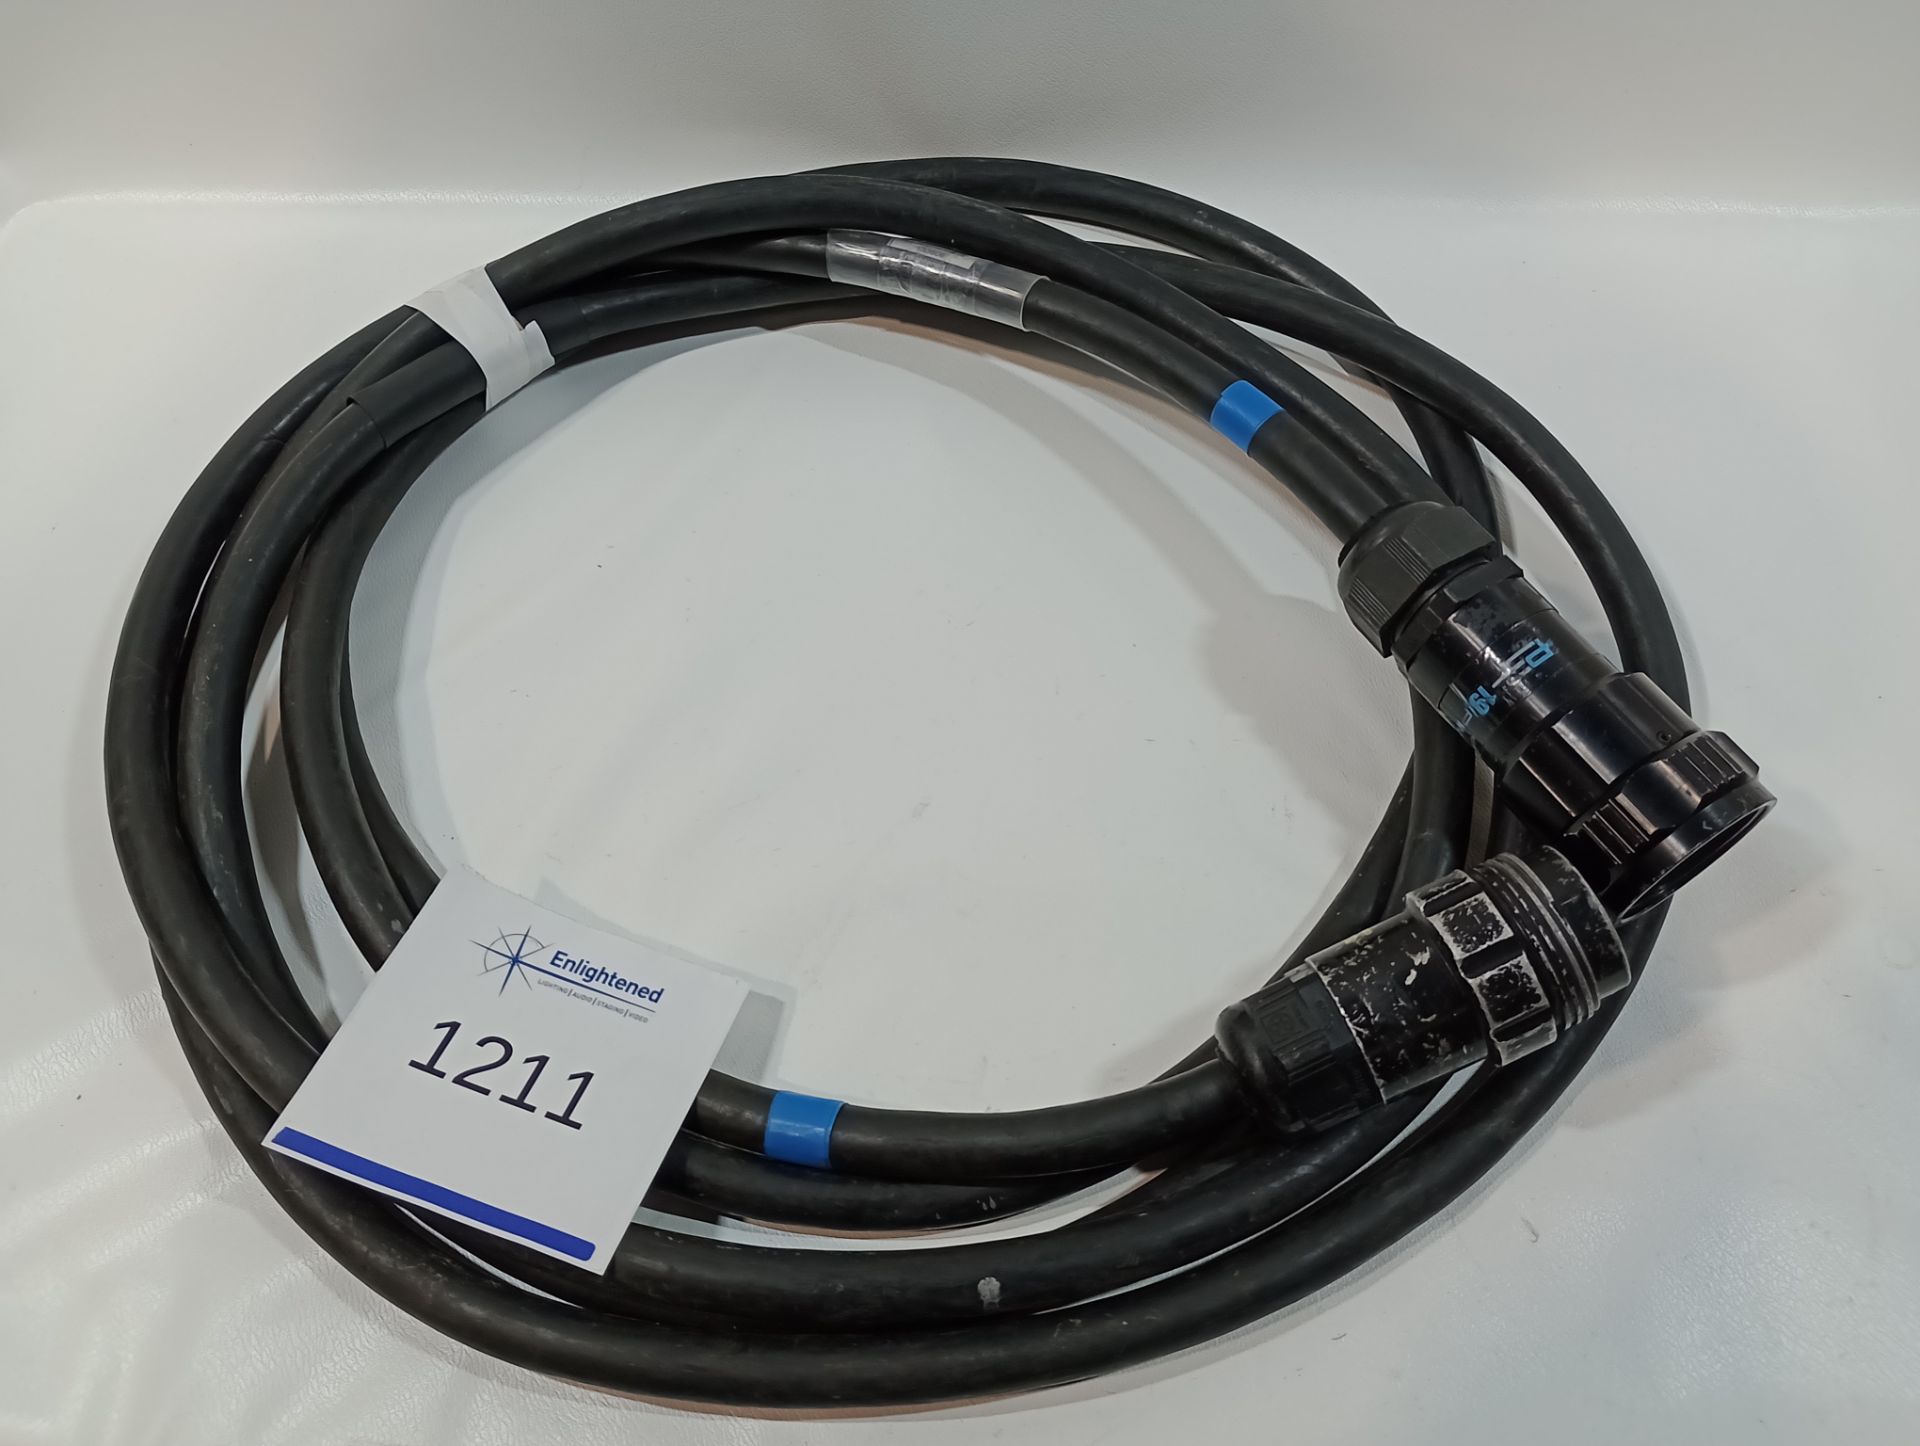 Socapex 5m 1.5mm Cable - Image 2 of 2